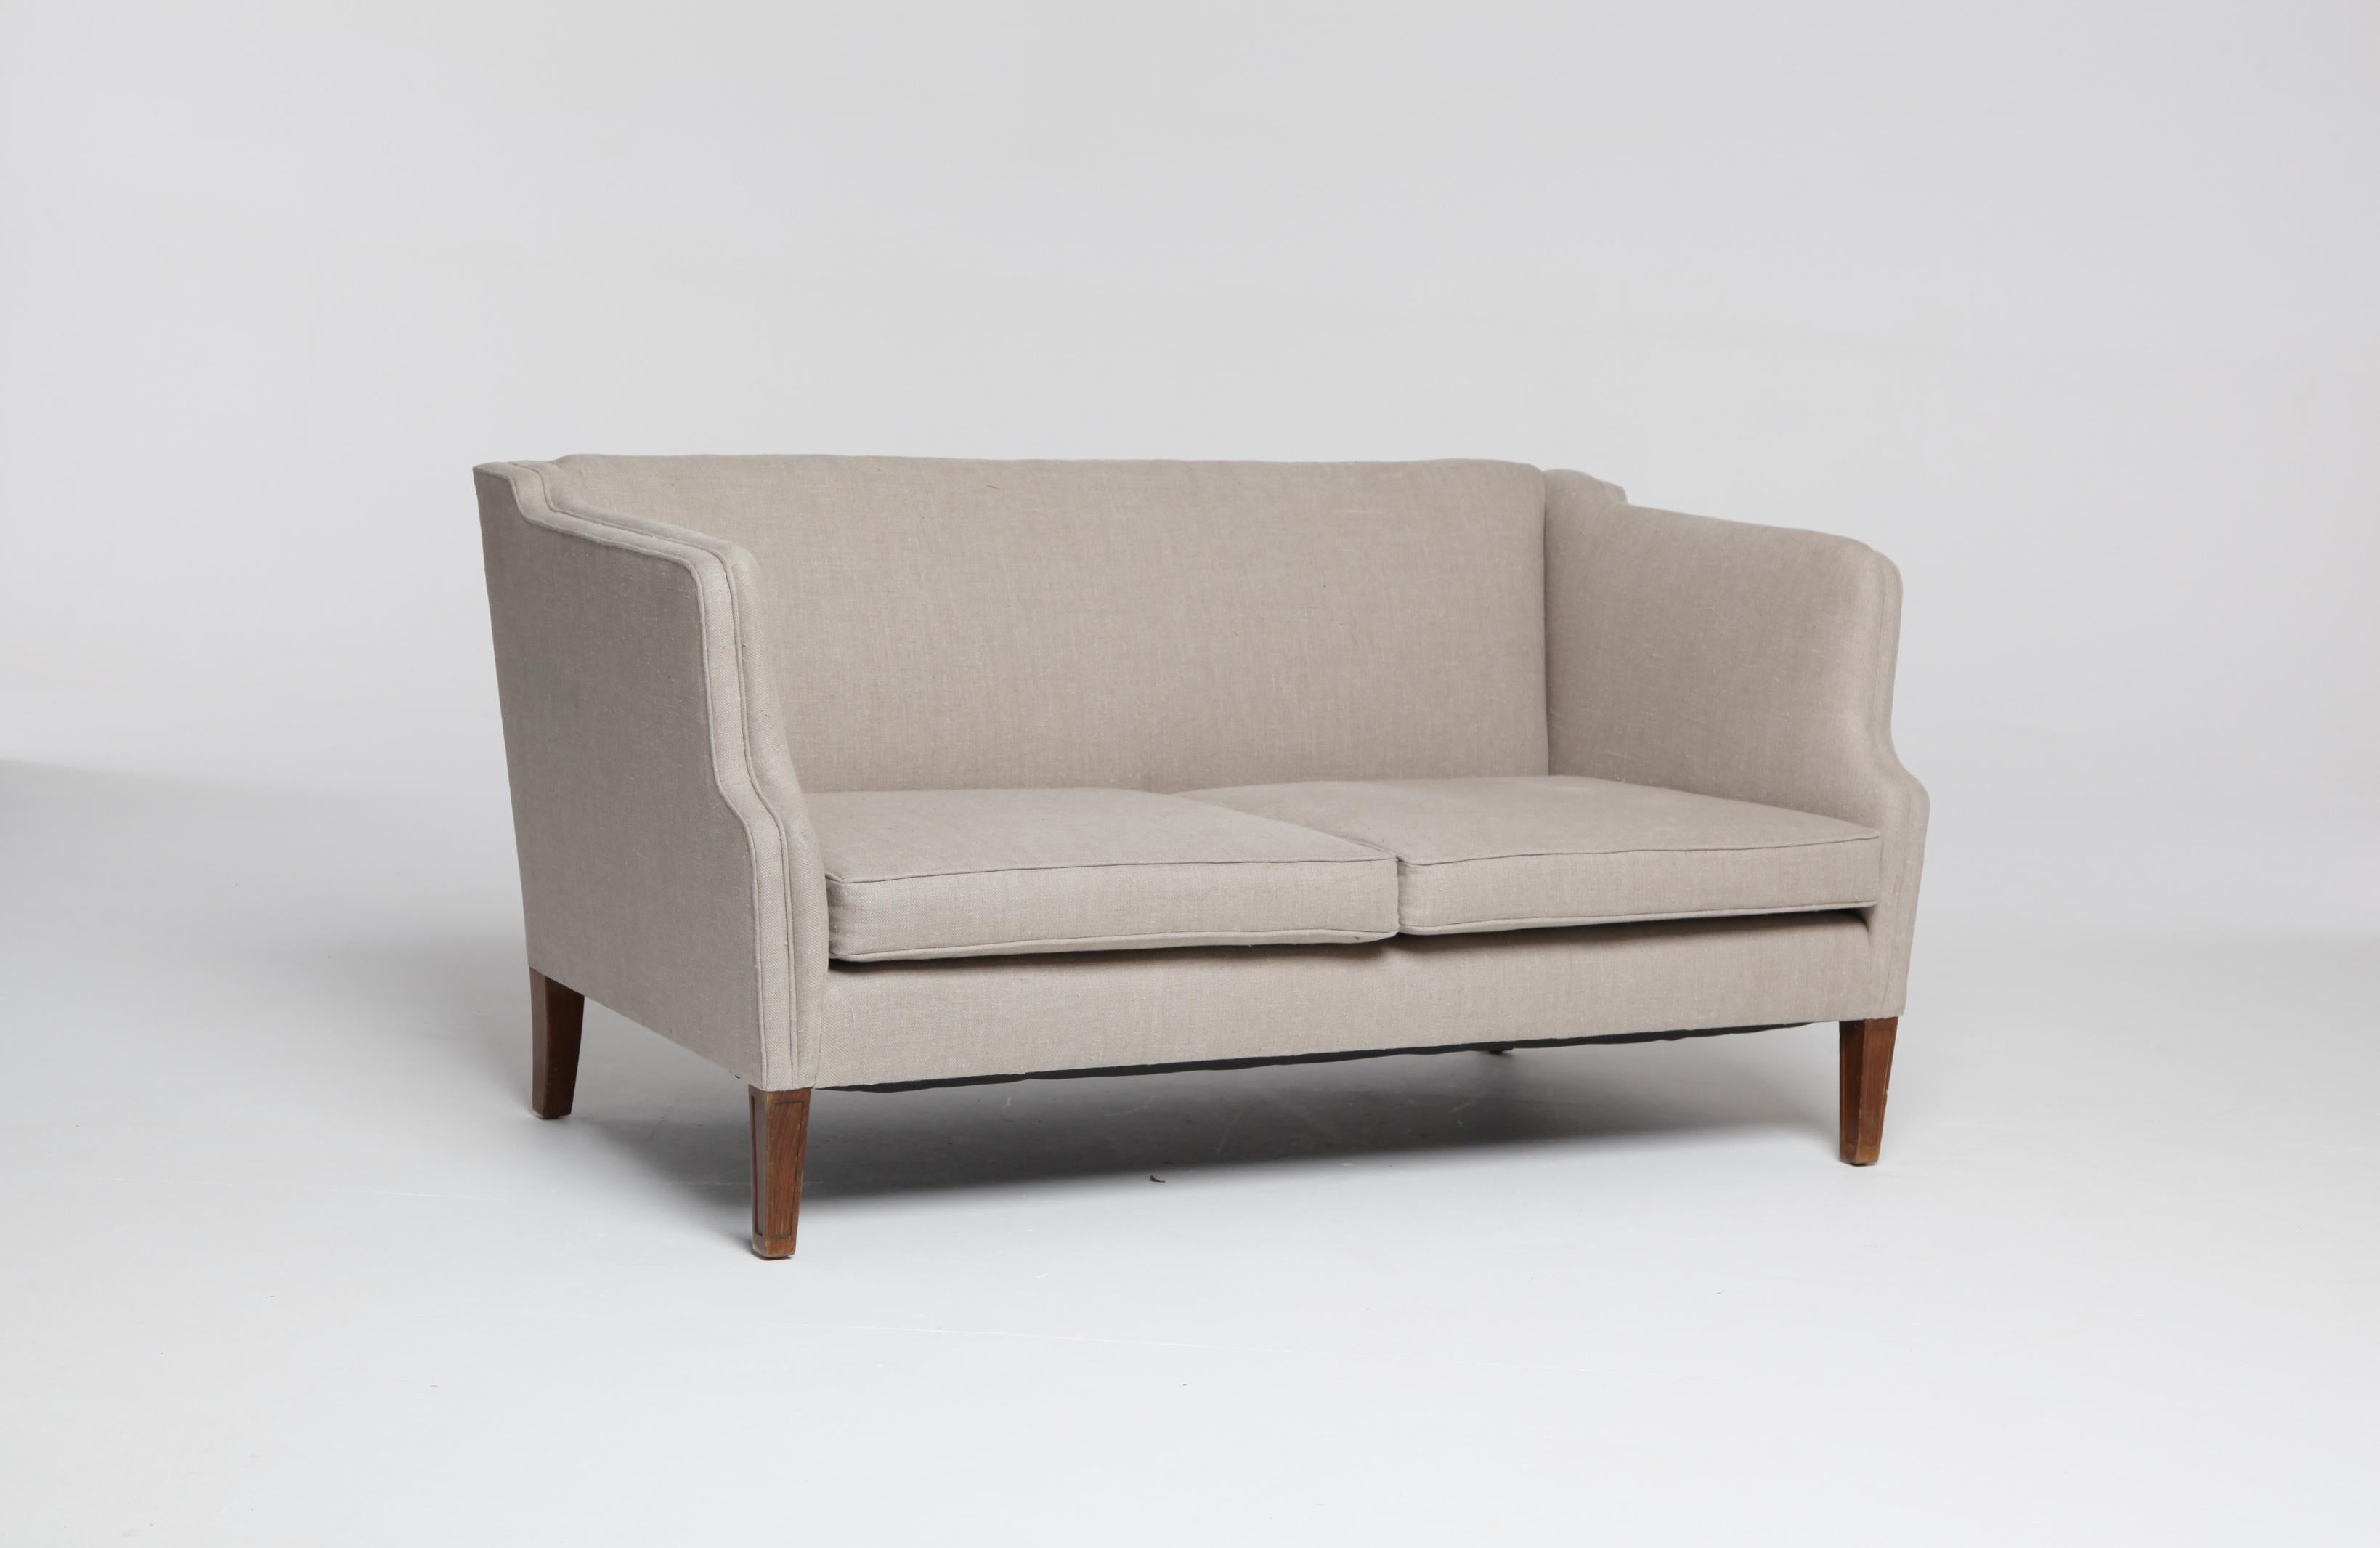 An elegant and Classic Danish midcentury 2-seat sofa or loveseat newly upholstered in natural linen.

Measures: Height at back (highest point) 73.5cm
Depth 77cm
Width 145cm.
 